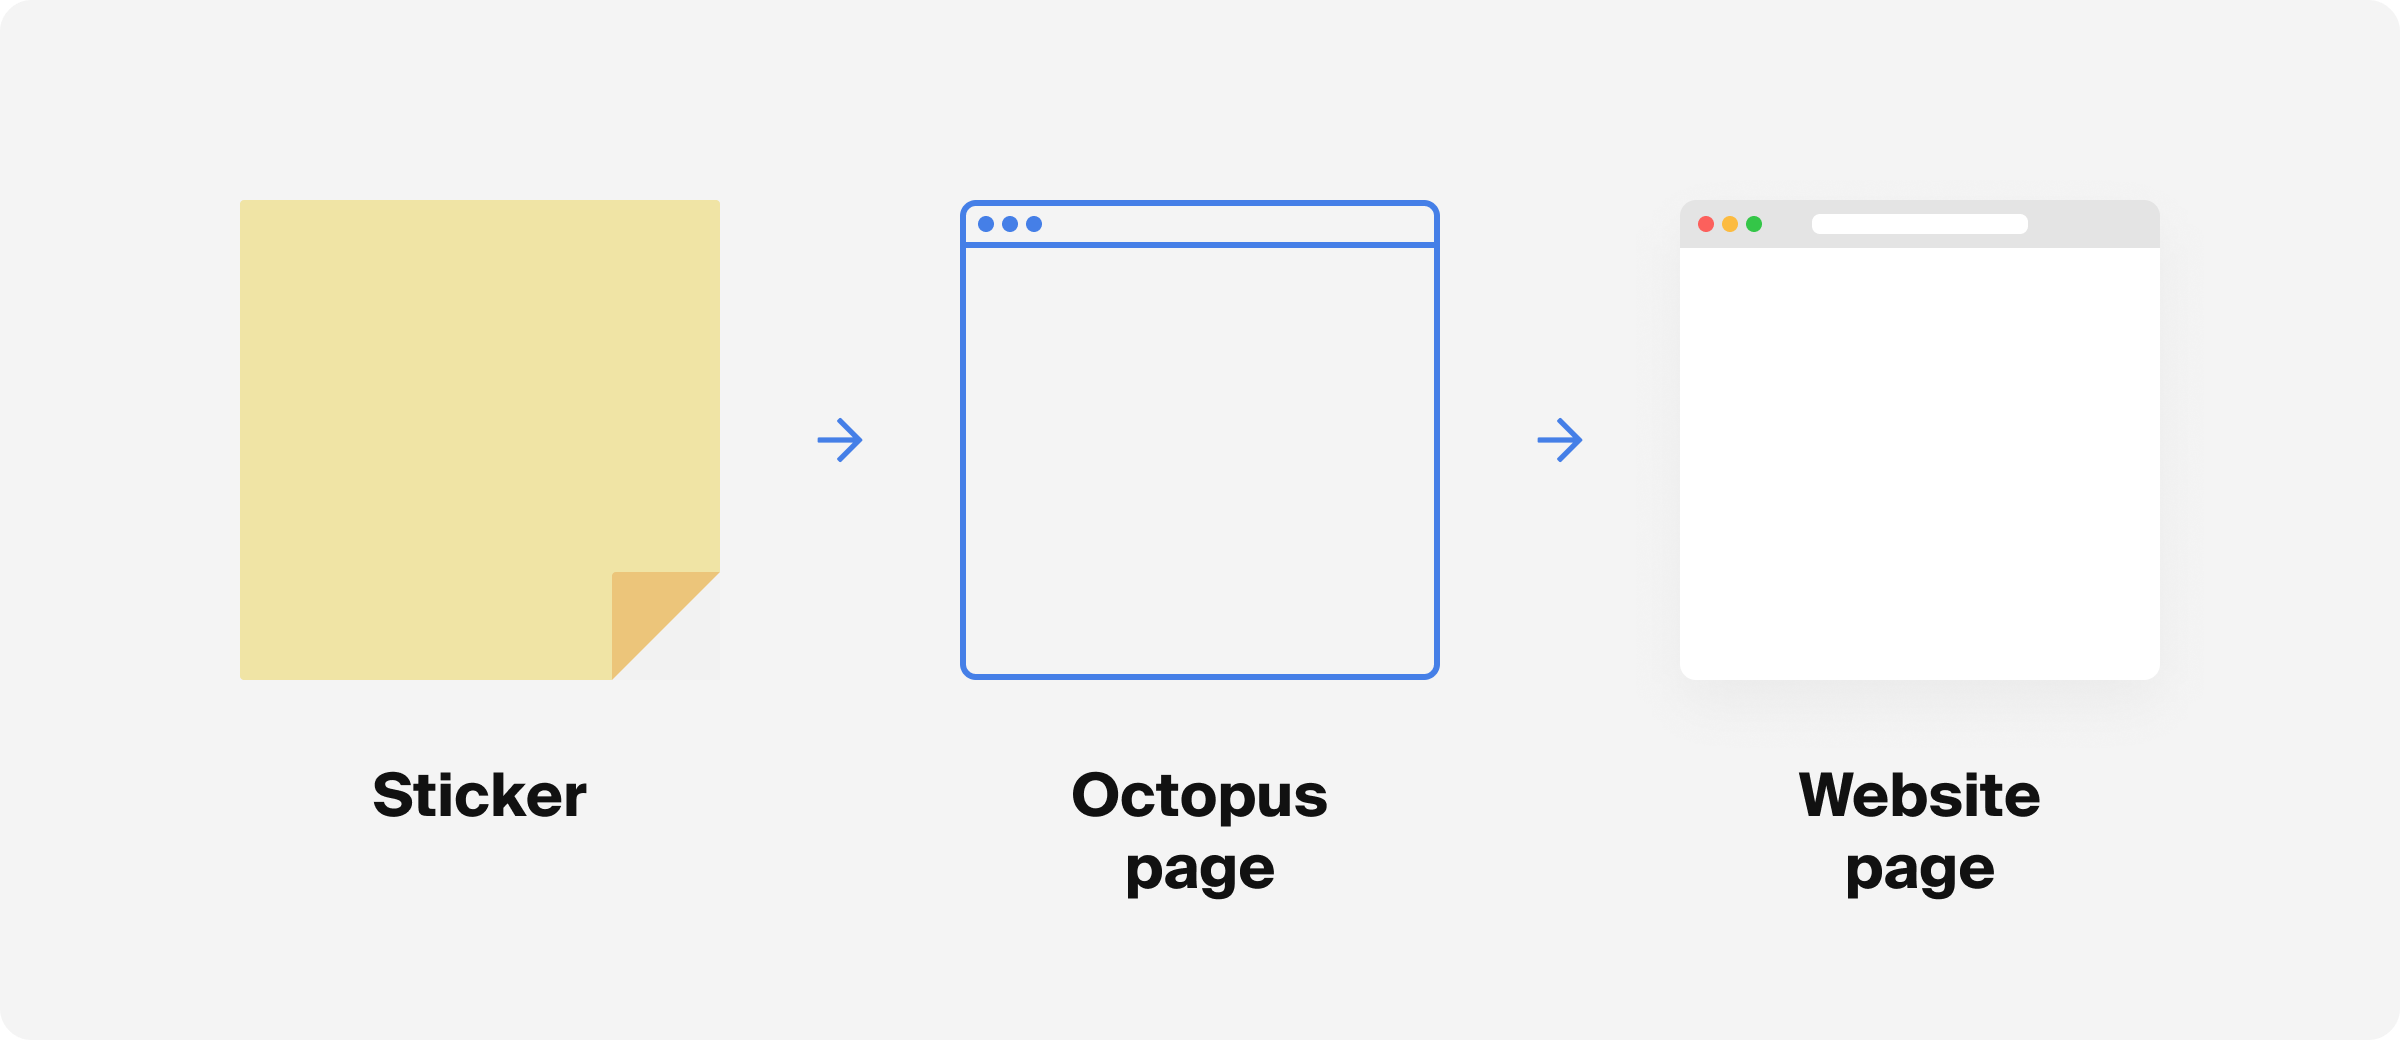 Octopus page. The Content Brick Method.